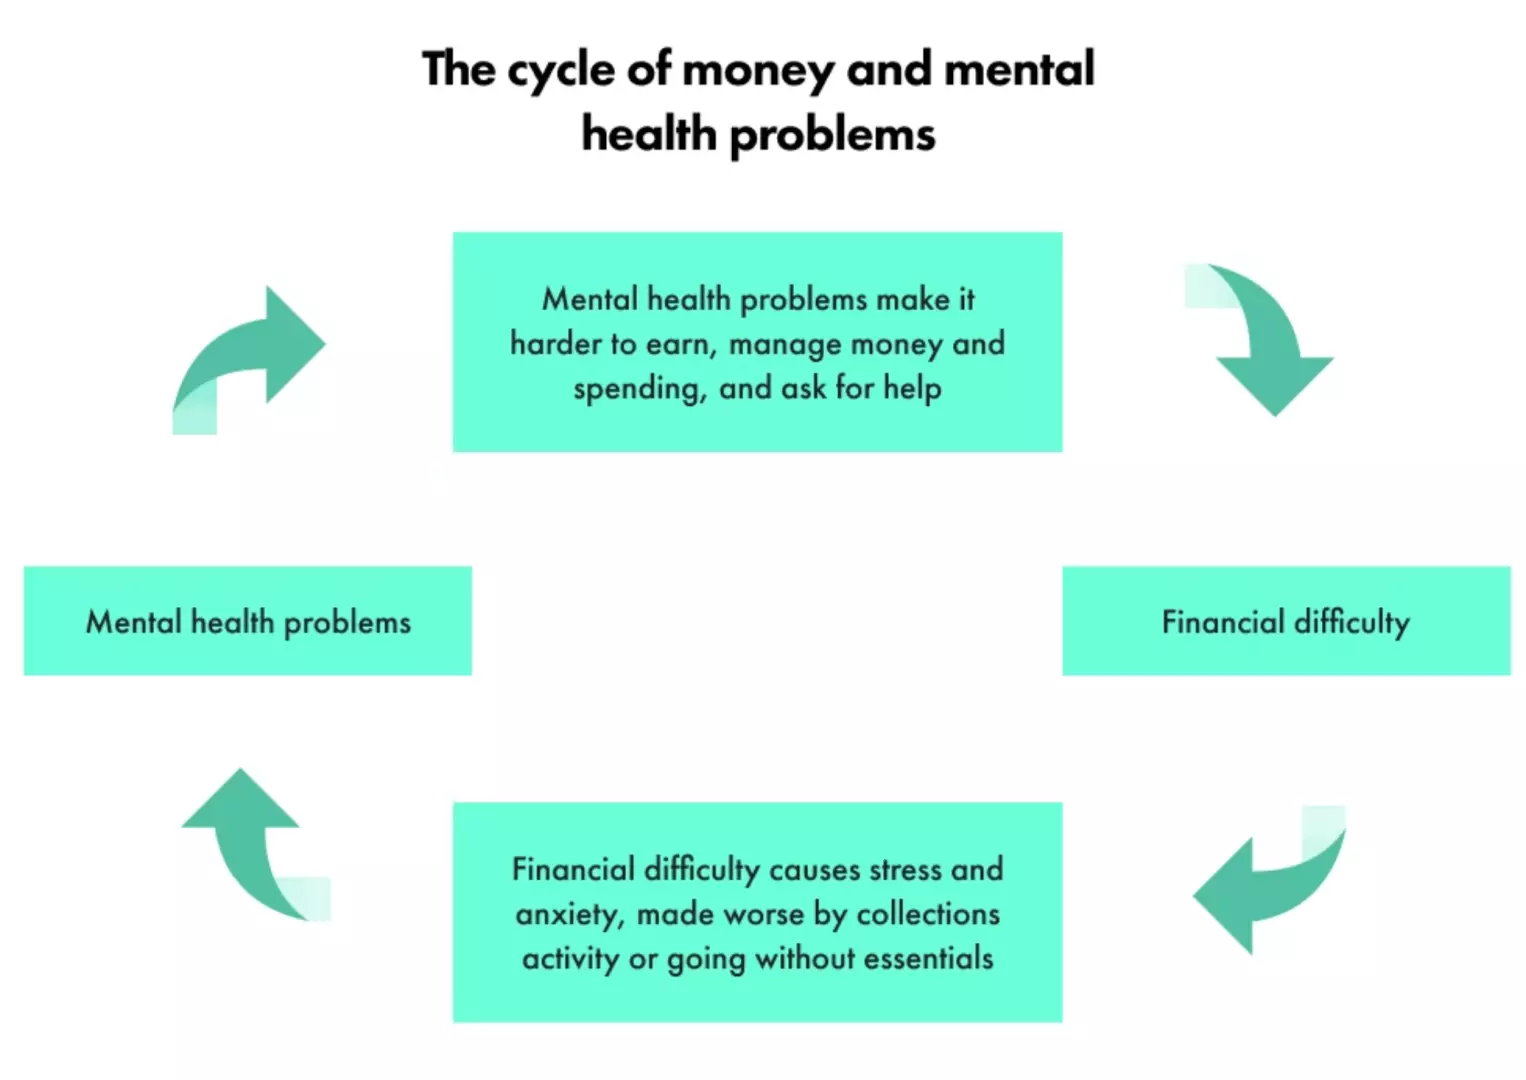 Cycle_of_Money_and_Mental_Health_Problems.png